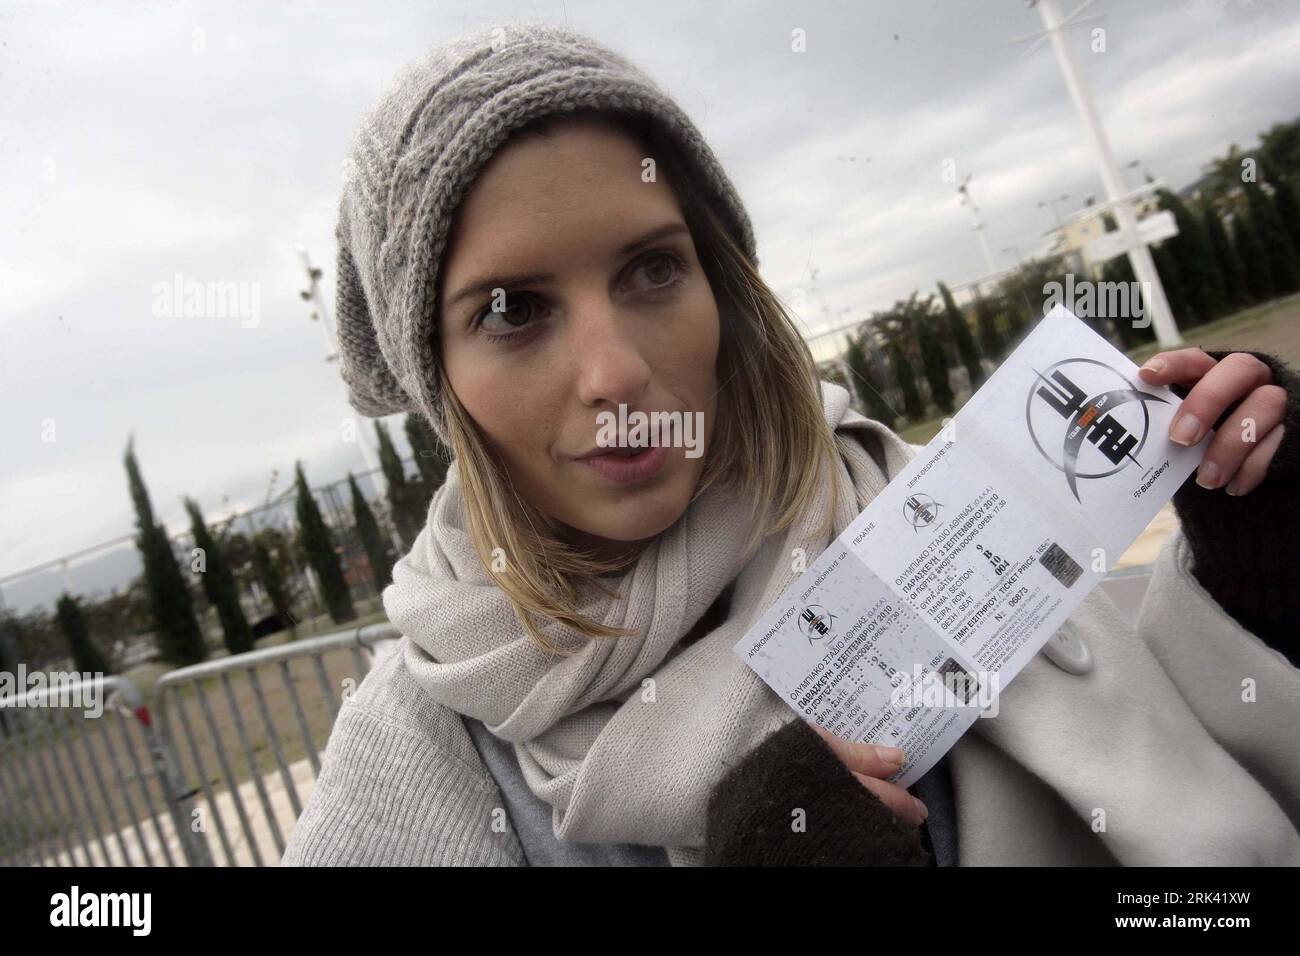 Bildnummer: 53570193  Datum: 02.11.2009  Copyright: imago/Xinhua (091103) -- ATHENS, Nov. 3, 2009 (Xinhua) -- A girl shows her ticket for a U2 concert at the  in Athens, capital of Greece, on Nov. 2, 2009. Fans of Irish rock band U2 queued up at the Olympic Stadium Monday for the tickets of U2 s first concert in Athens slated for Sept. 3, 2010. (Xinhua/Marios Lolos) (nxl) (2)GREECE-ATHENS-U2-CONCERT-TICKET PUBLICATIONxNOTxINxCHN Athen  Musik Konzert Karten Vorverkauf Ticket Kartenvorverkauf kbdig xub 2009 quer o0 Konzertkarte, Konzertticket o00 Objekte    Bildnummer 53570193 Date 02 11 2009 Co Stock Photo